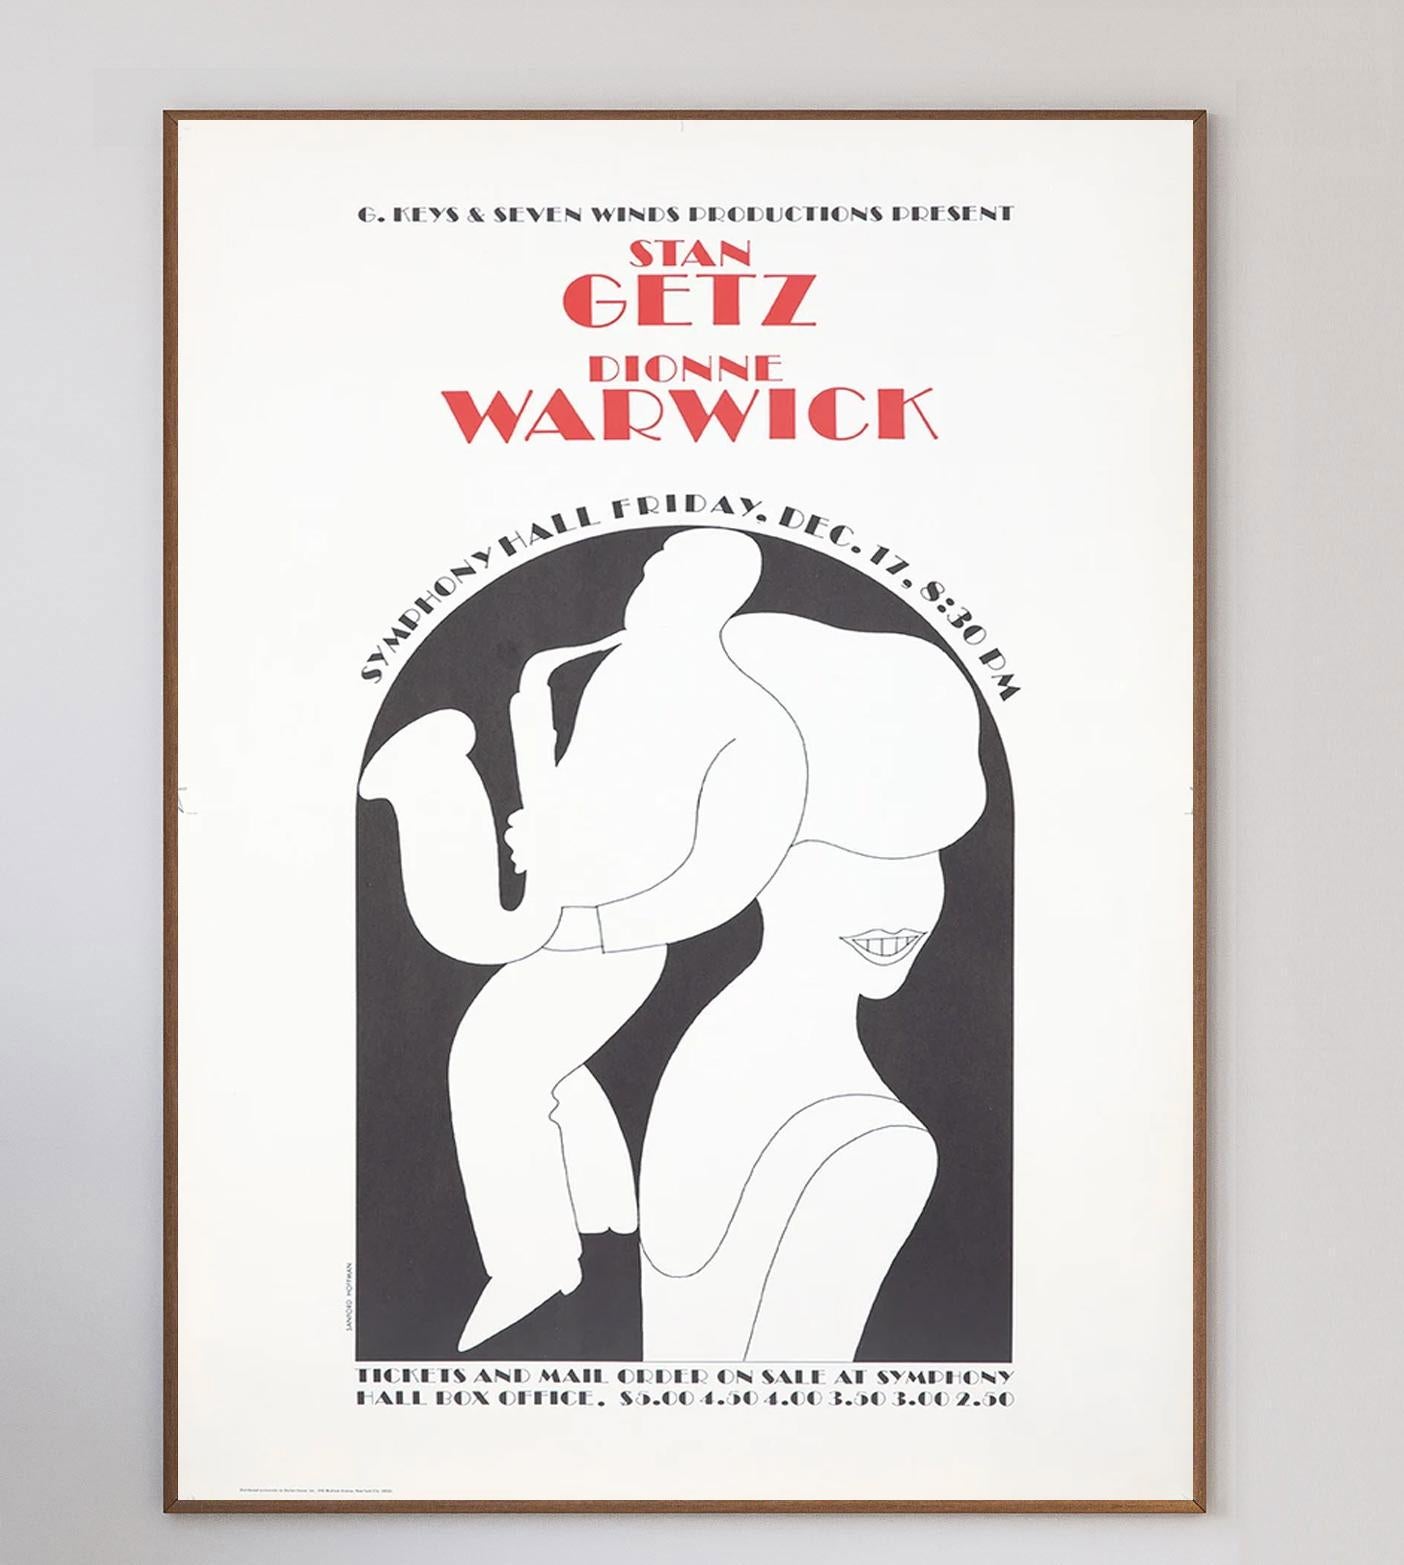 This stunning poster was designed by Sanford Hoffman for the legendary 1969 gig by jazz saxophonist Stan Getz and singer Dionne Warwick at the New York Symphony Hall. The concert was a rare coming together of the legendary jazz musician, famous for